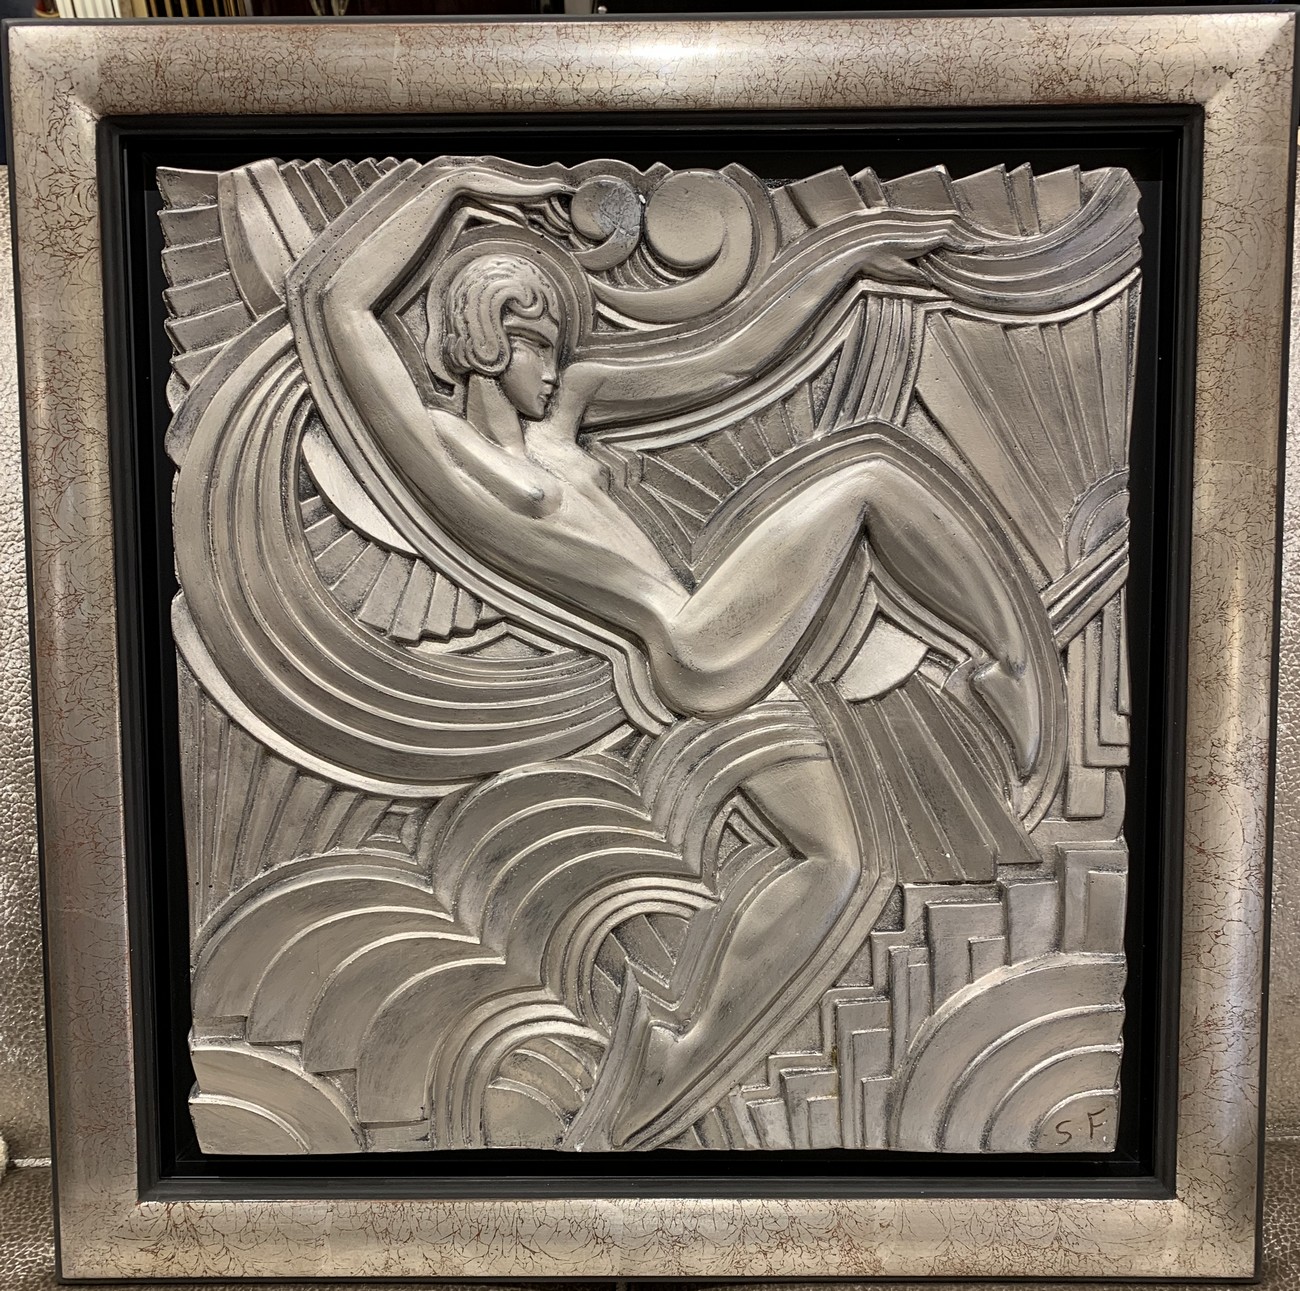 Product Art deco bas-relief